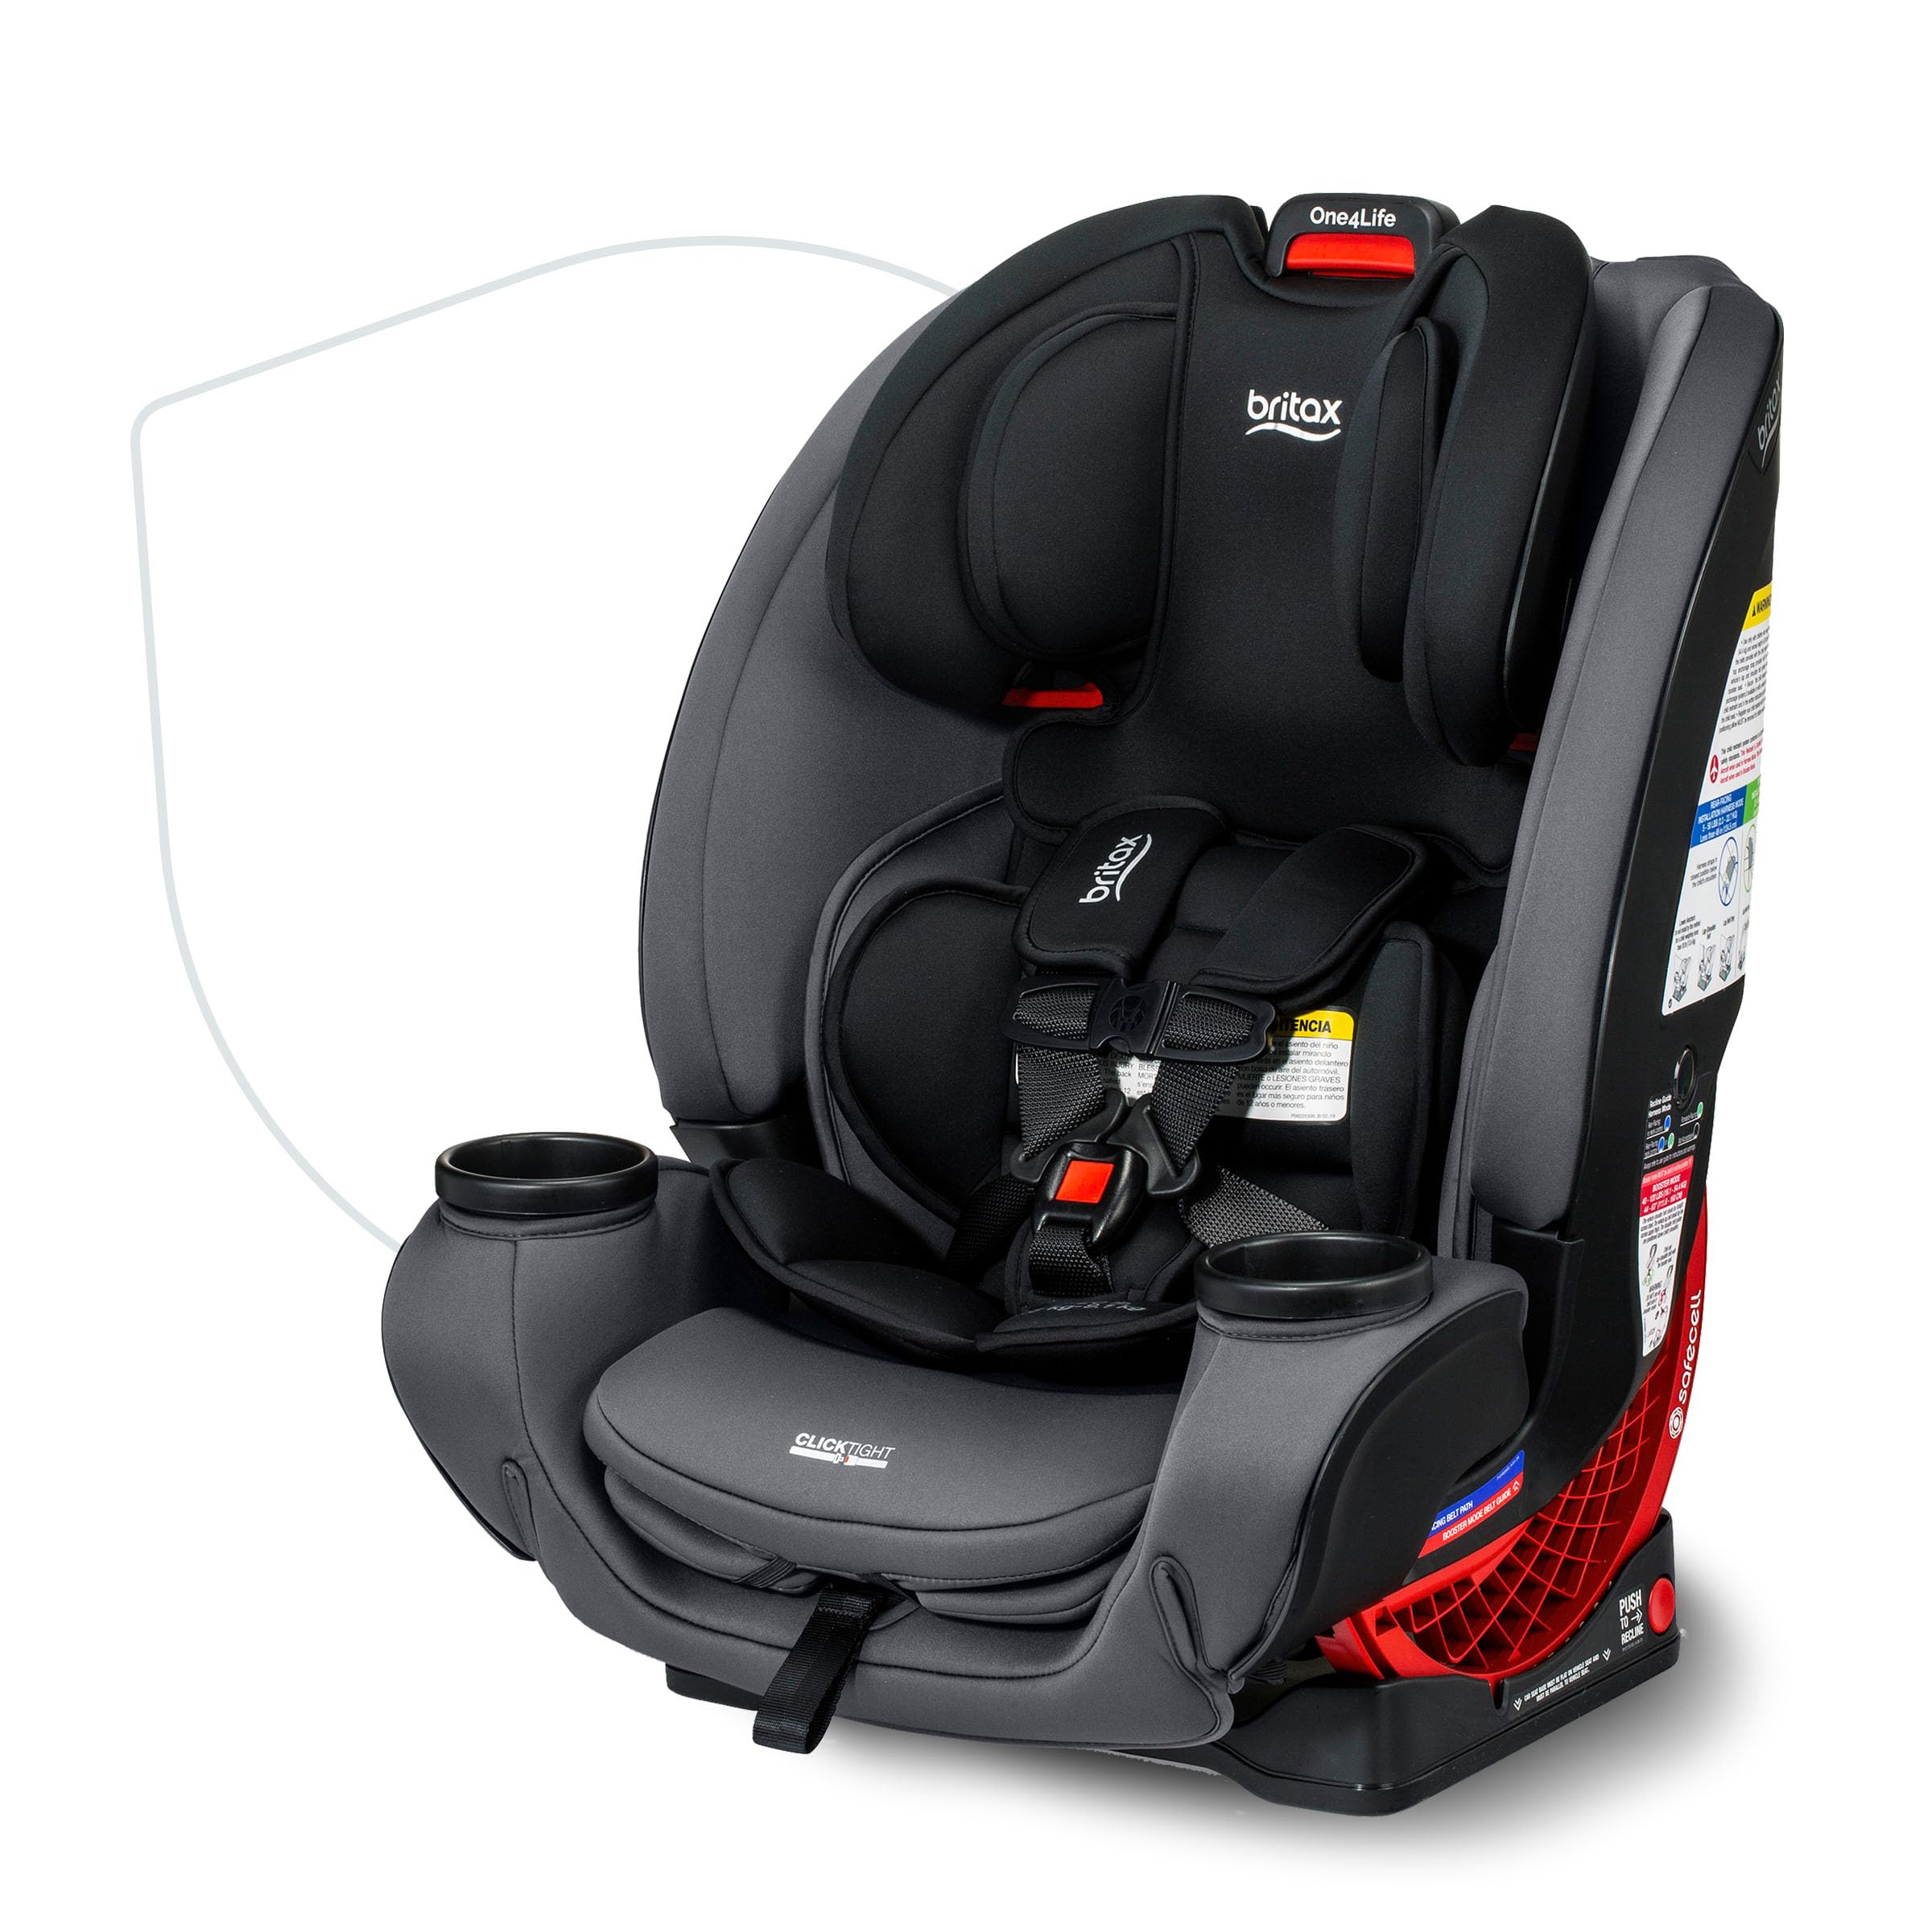 Britax One4Life All-In-One 10-Year Convertible Car Seat (Various) $280 + Free Shipping